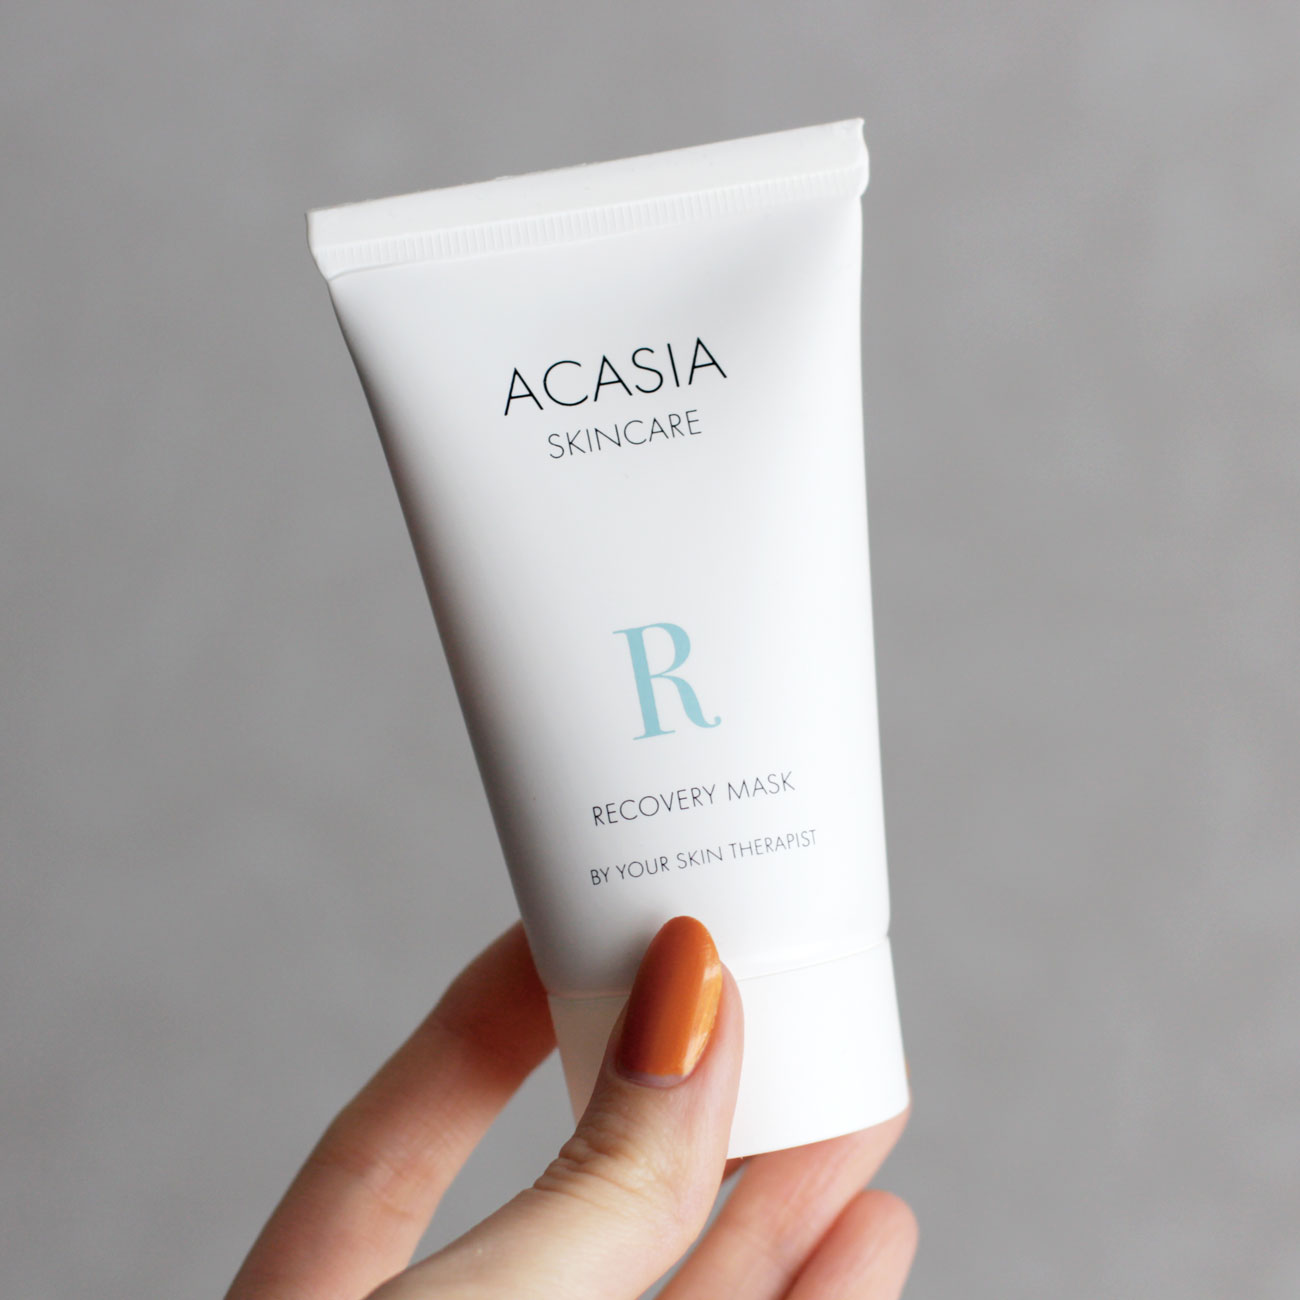 ACASIA SKINCARE RECOVERY MASK